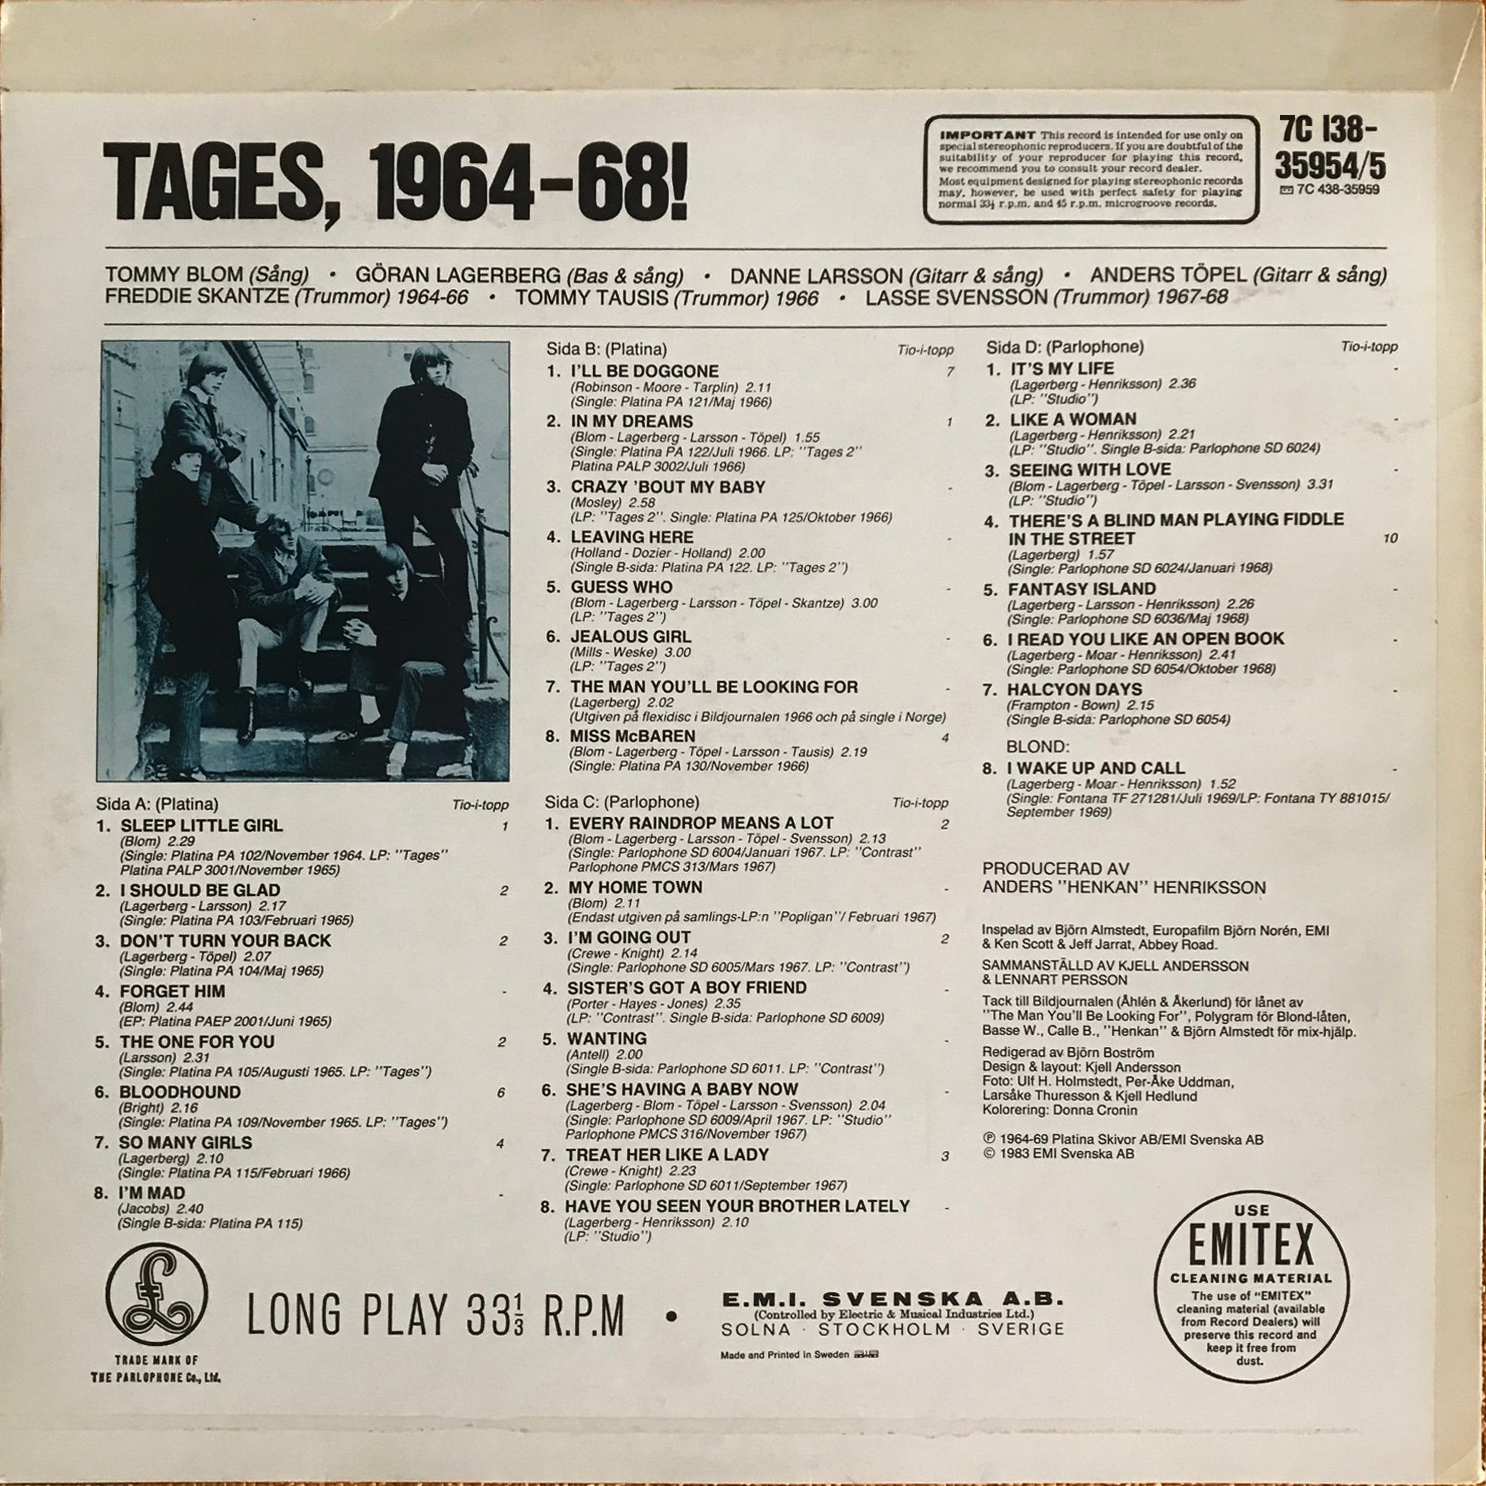 TAGES 1964-68